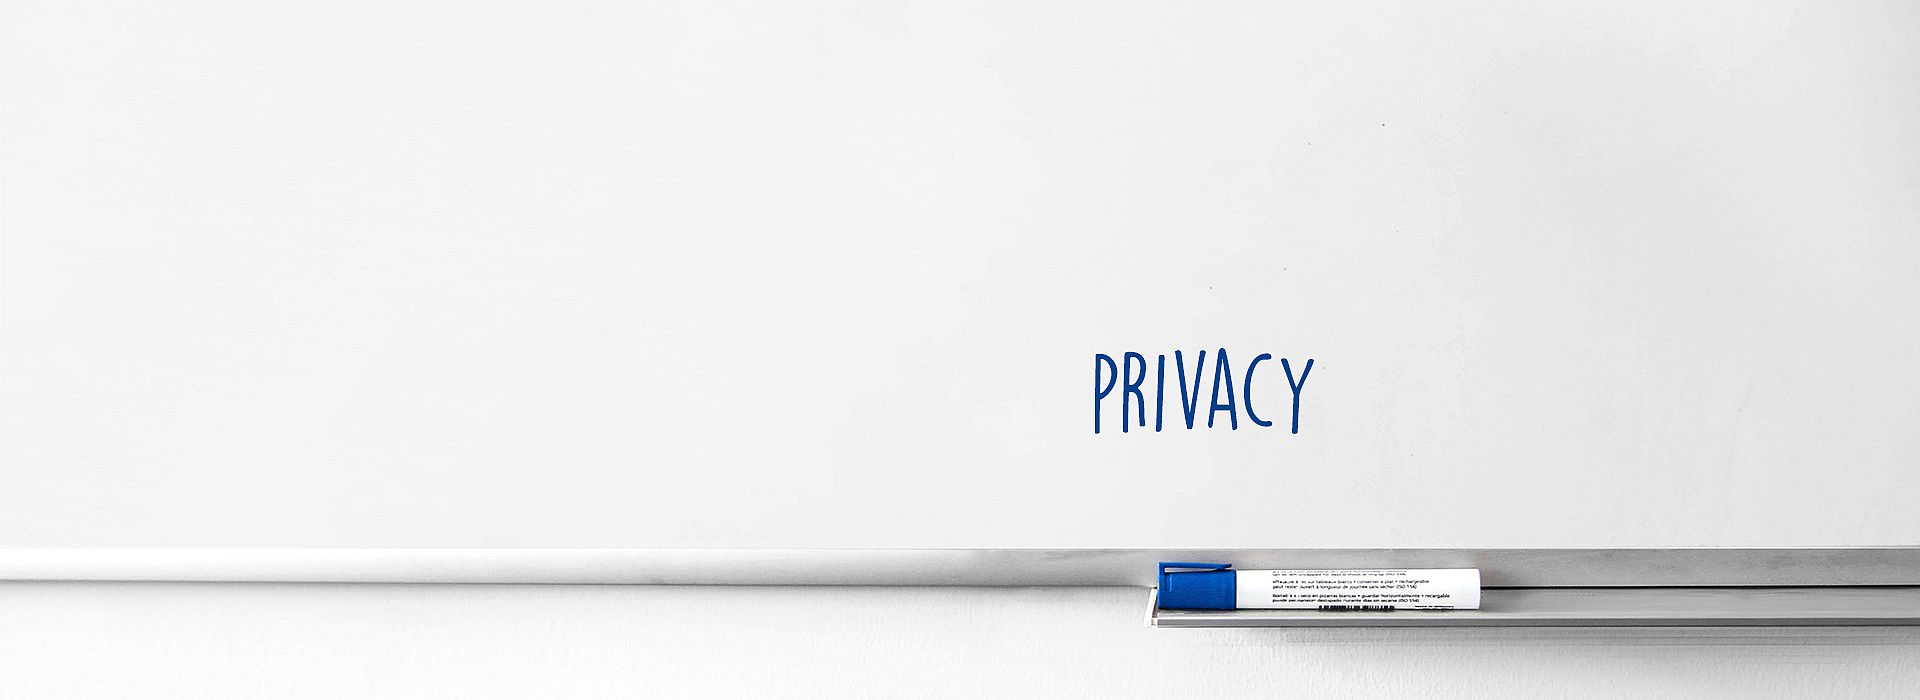 fortiss data privacy policy